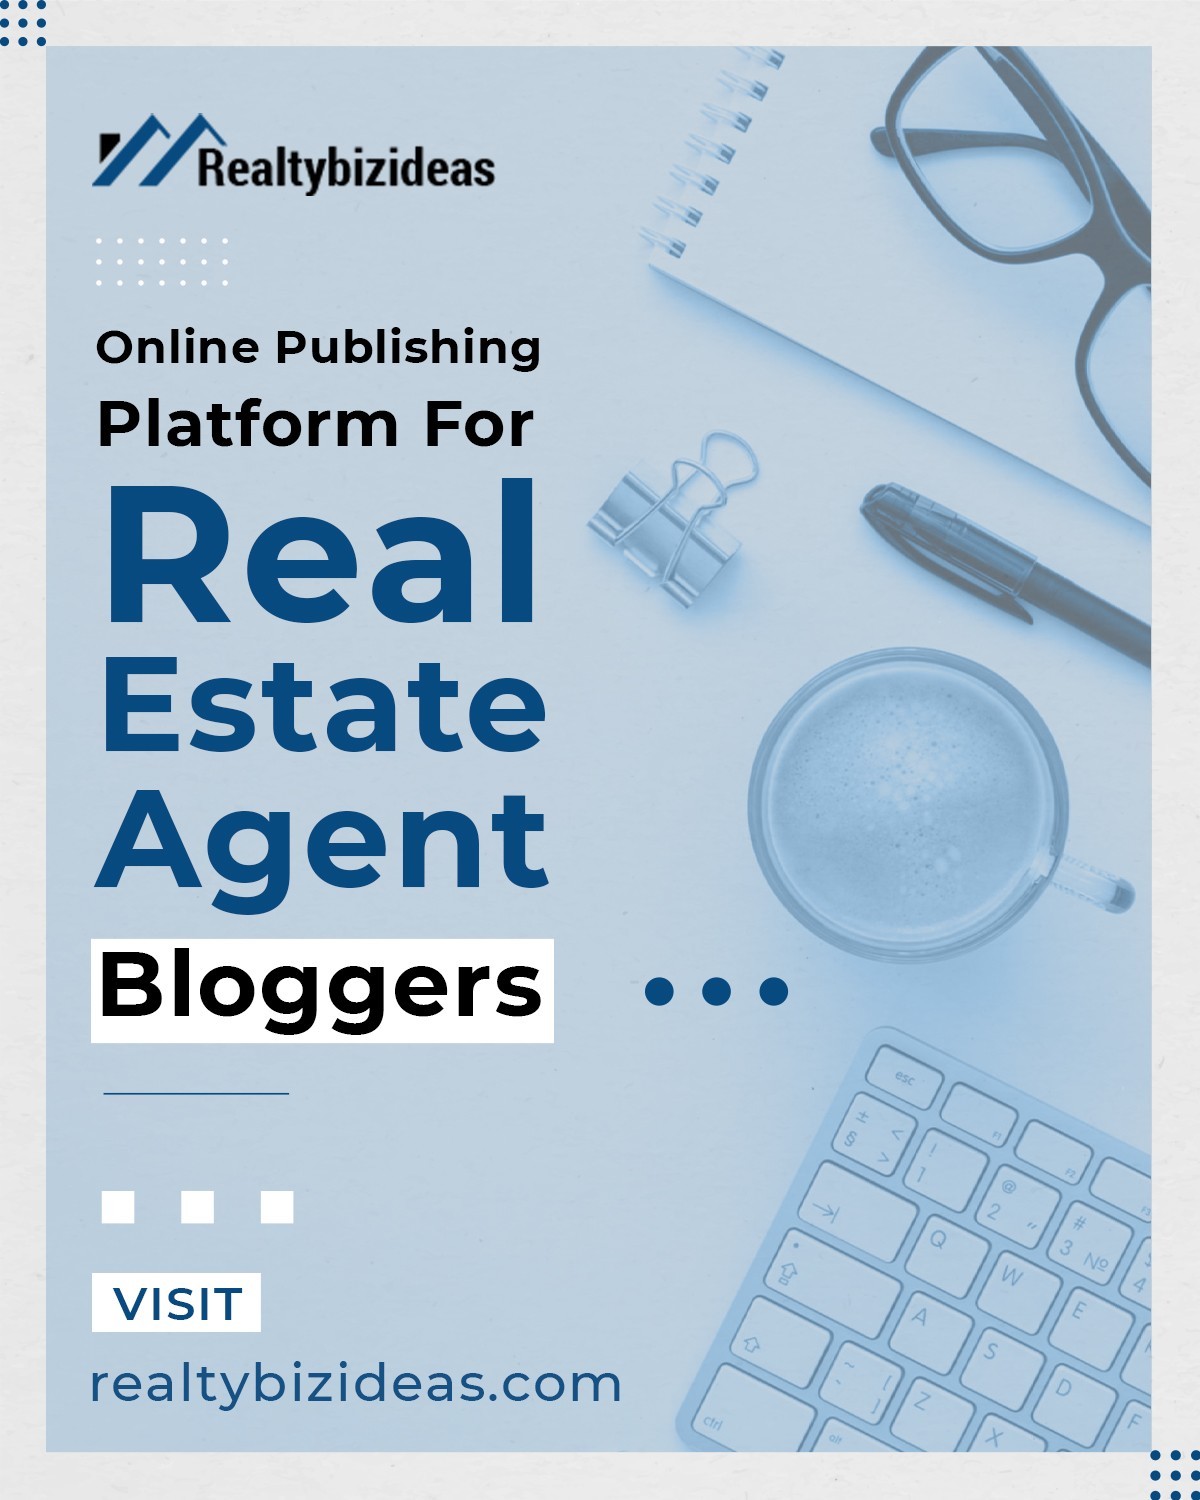 Which Is The Best Online Publishing Platform For Real Estate Agent Bloggers?